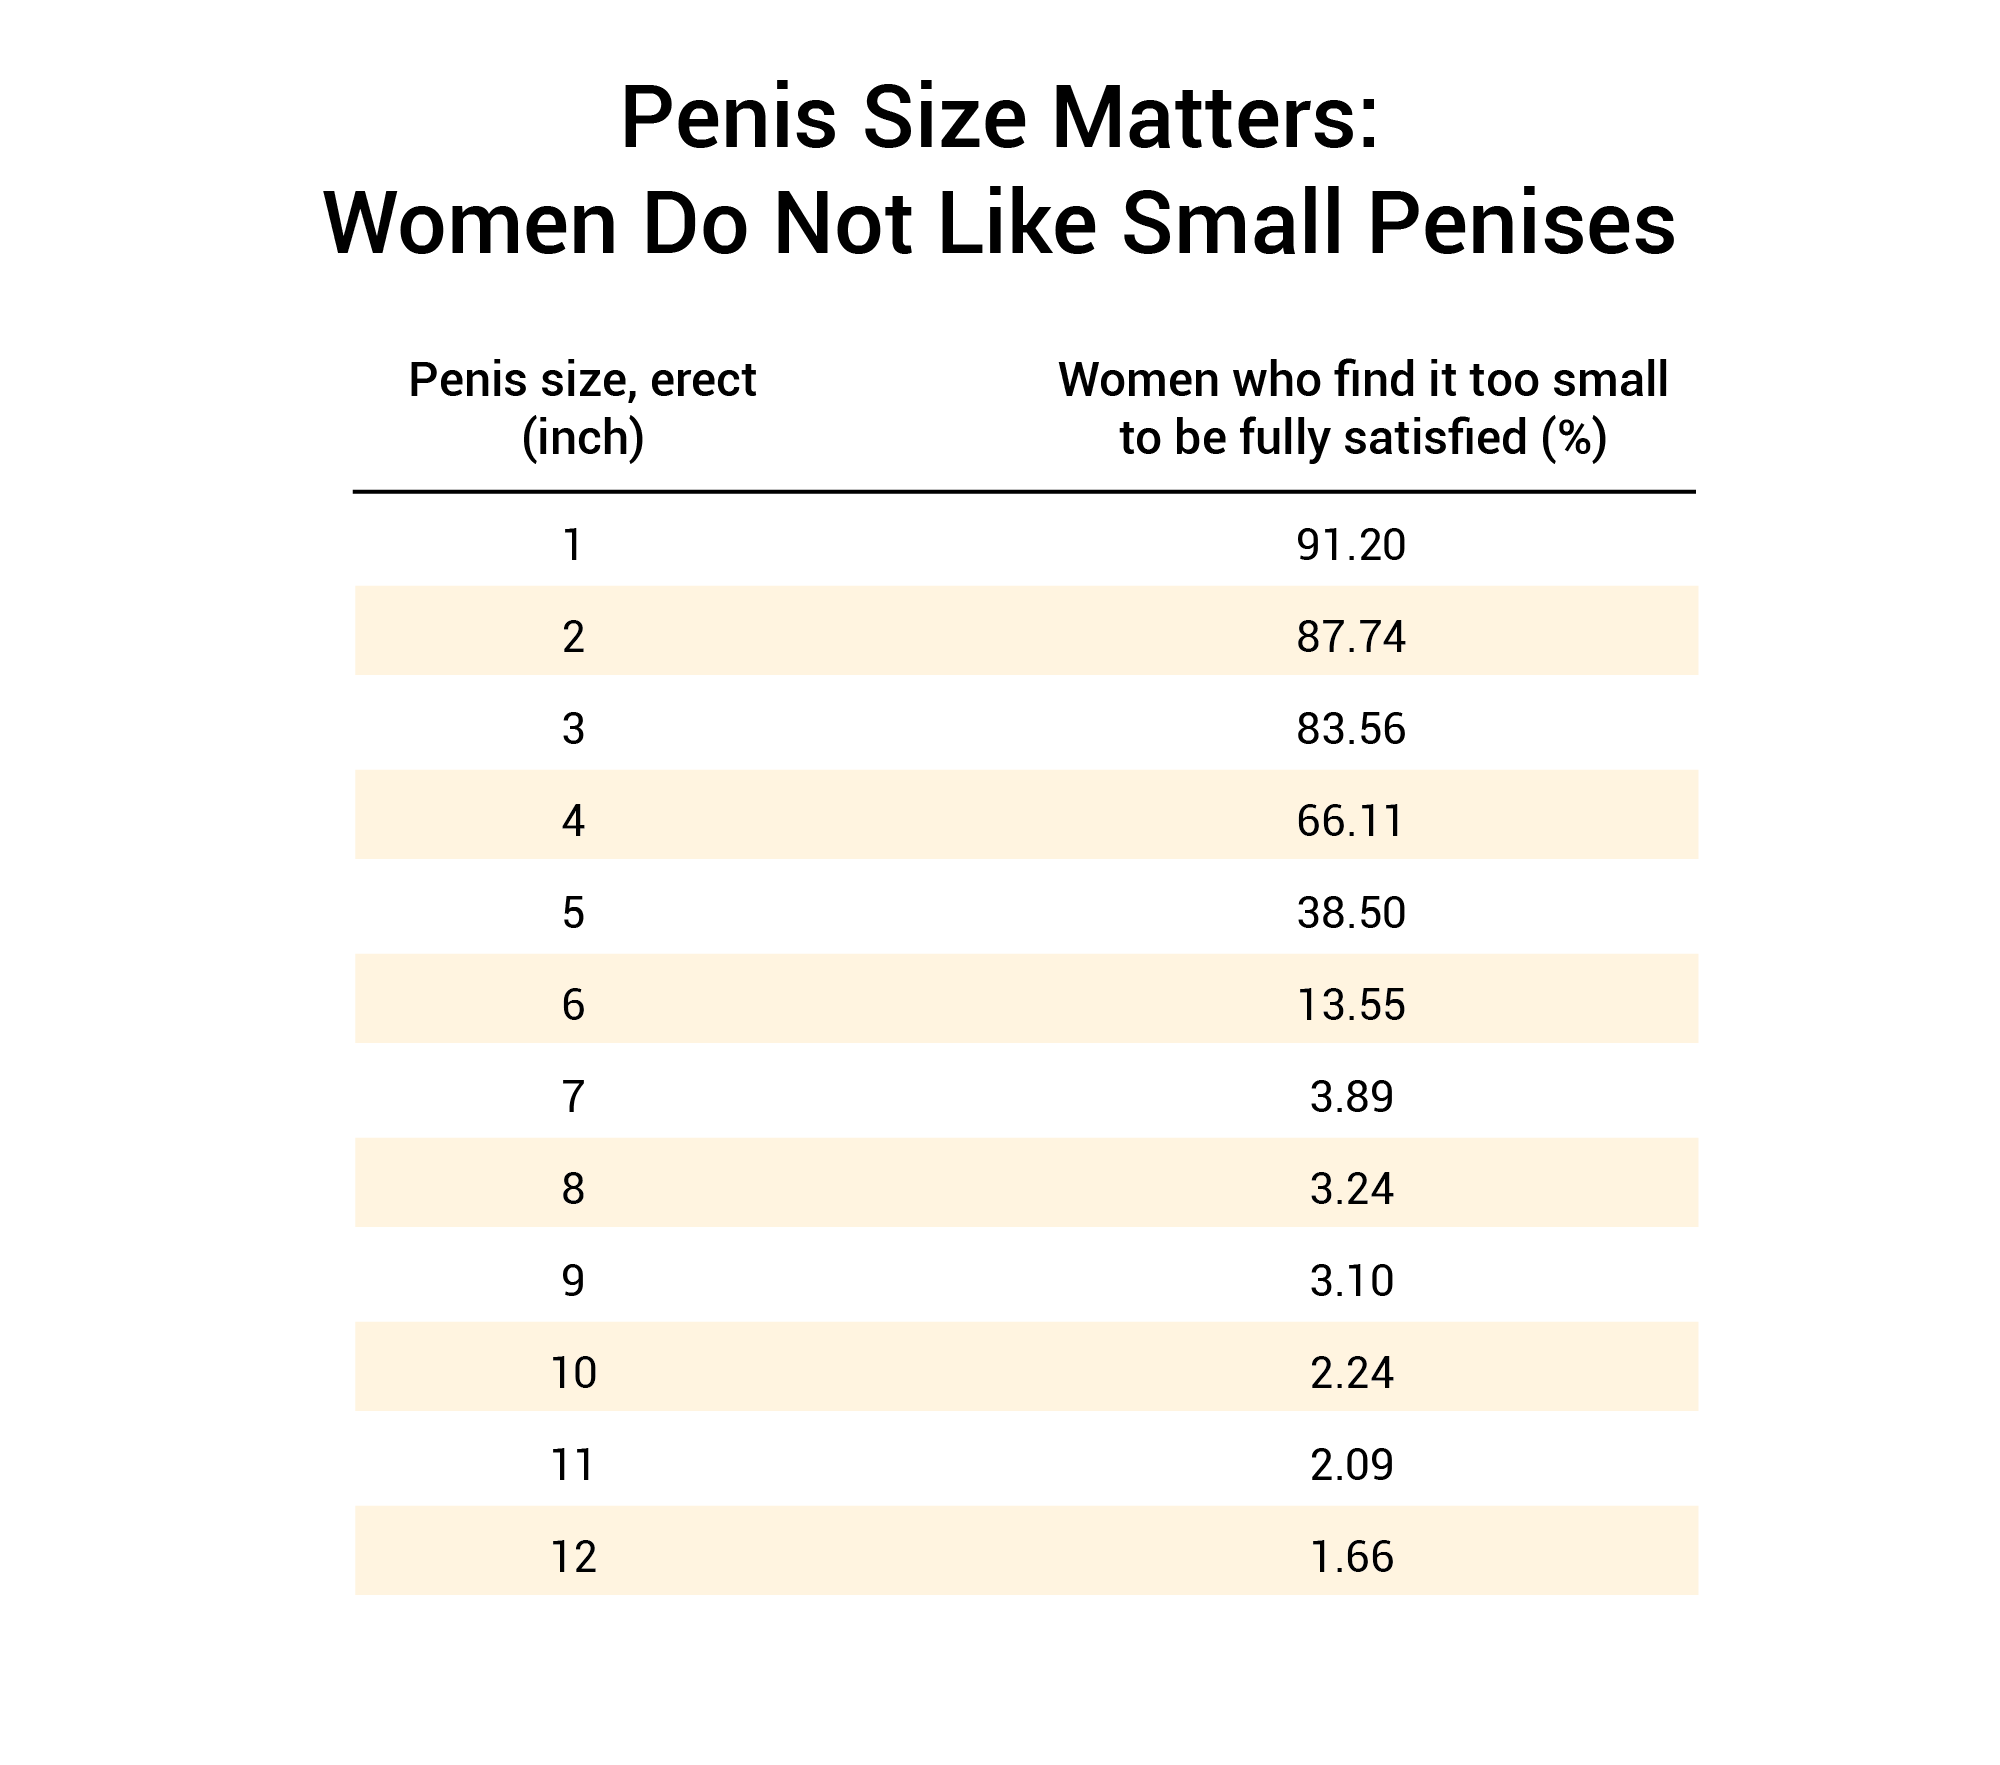 Does Size Matter? 91.7% Of Women Say It Does 1,387 Woman Study pic